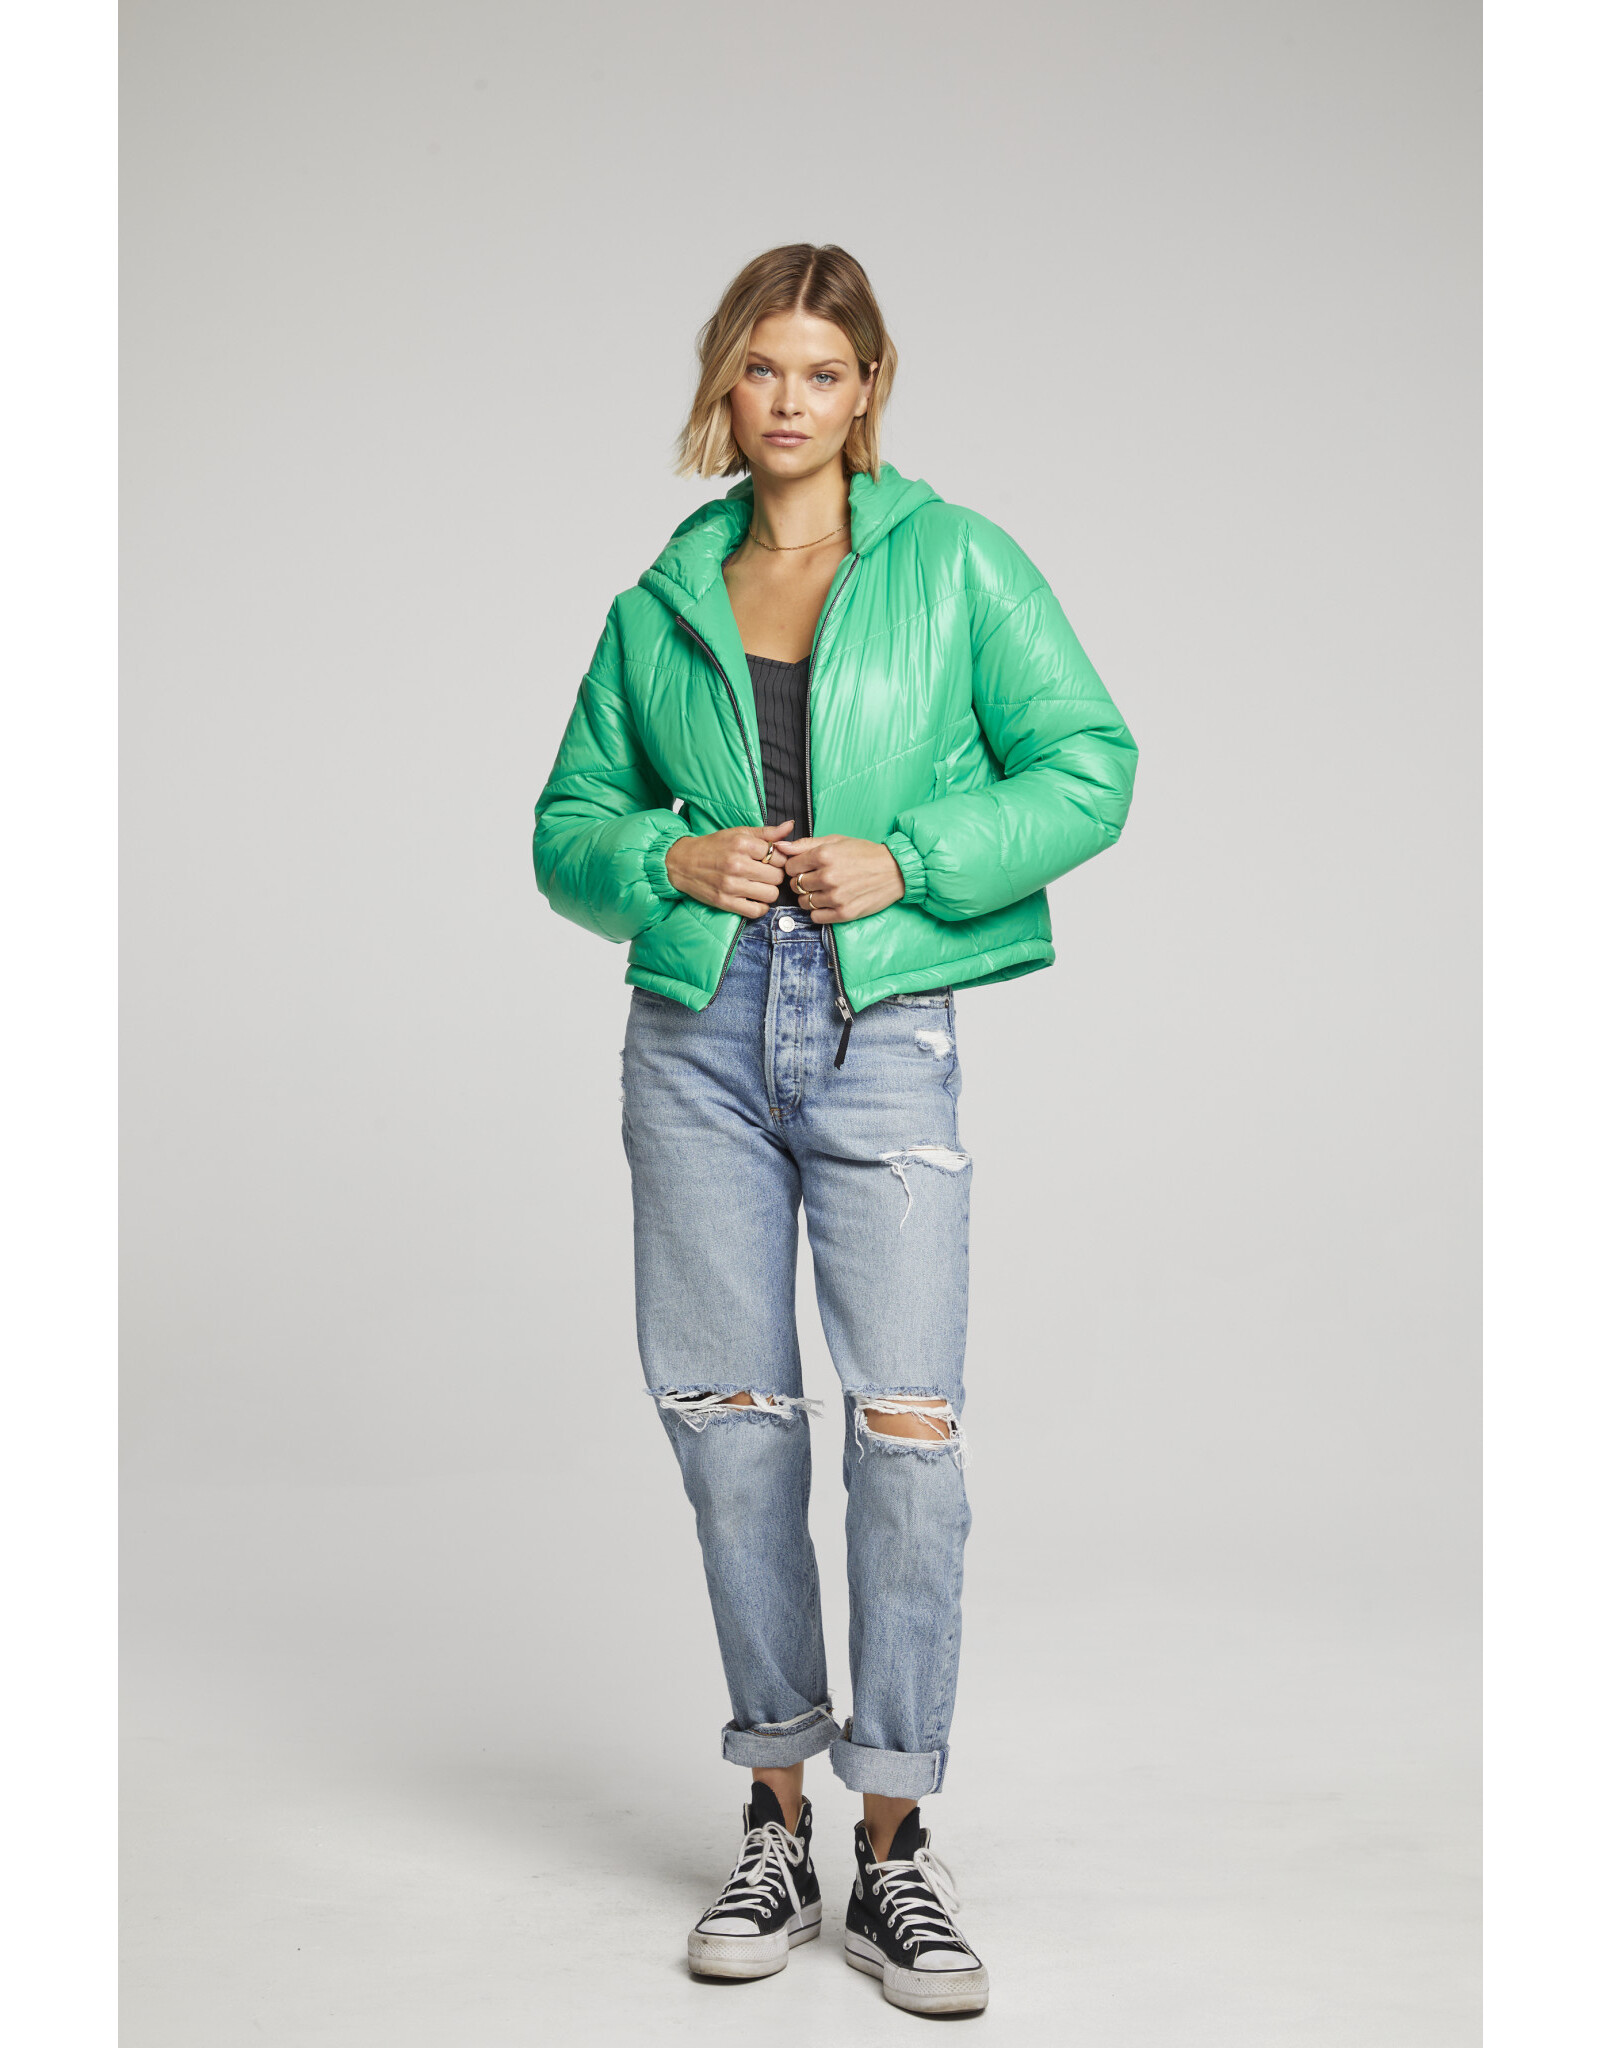 Saltwater luxe SWL Marsily Jacket